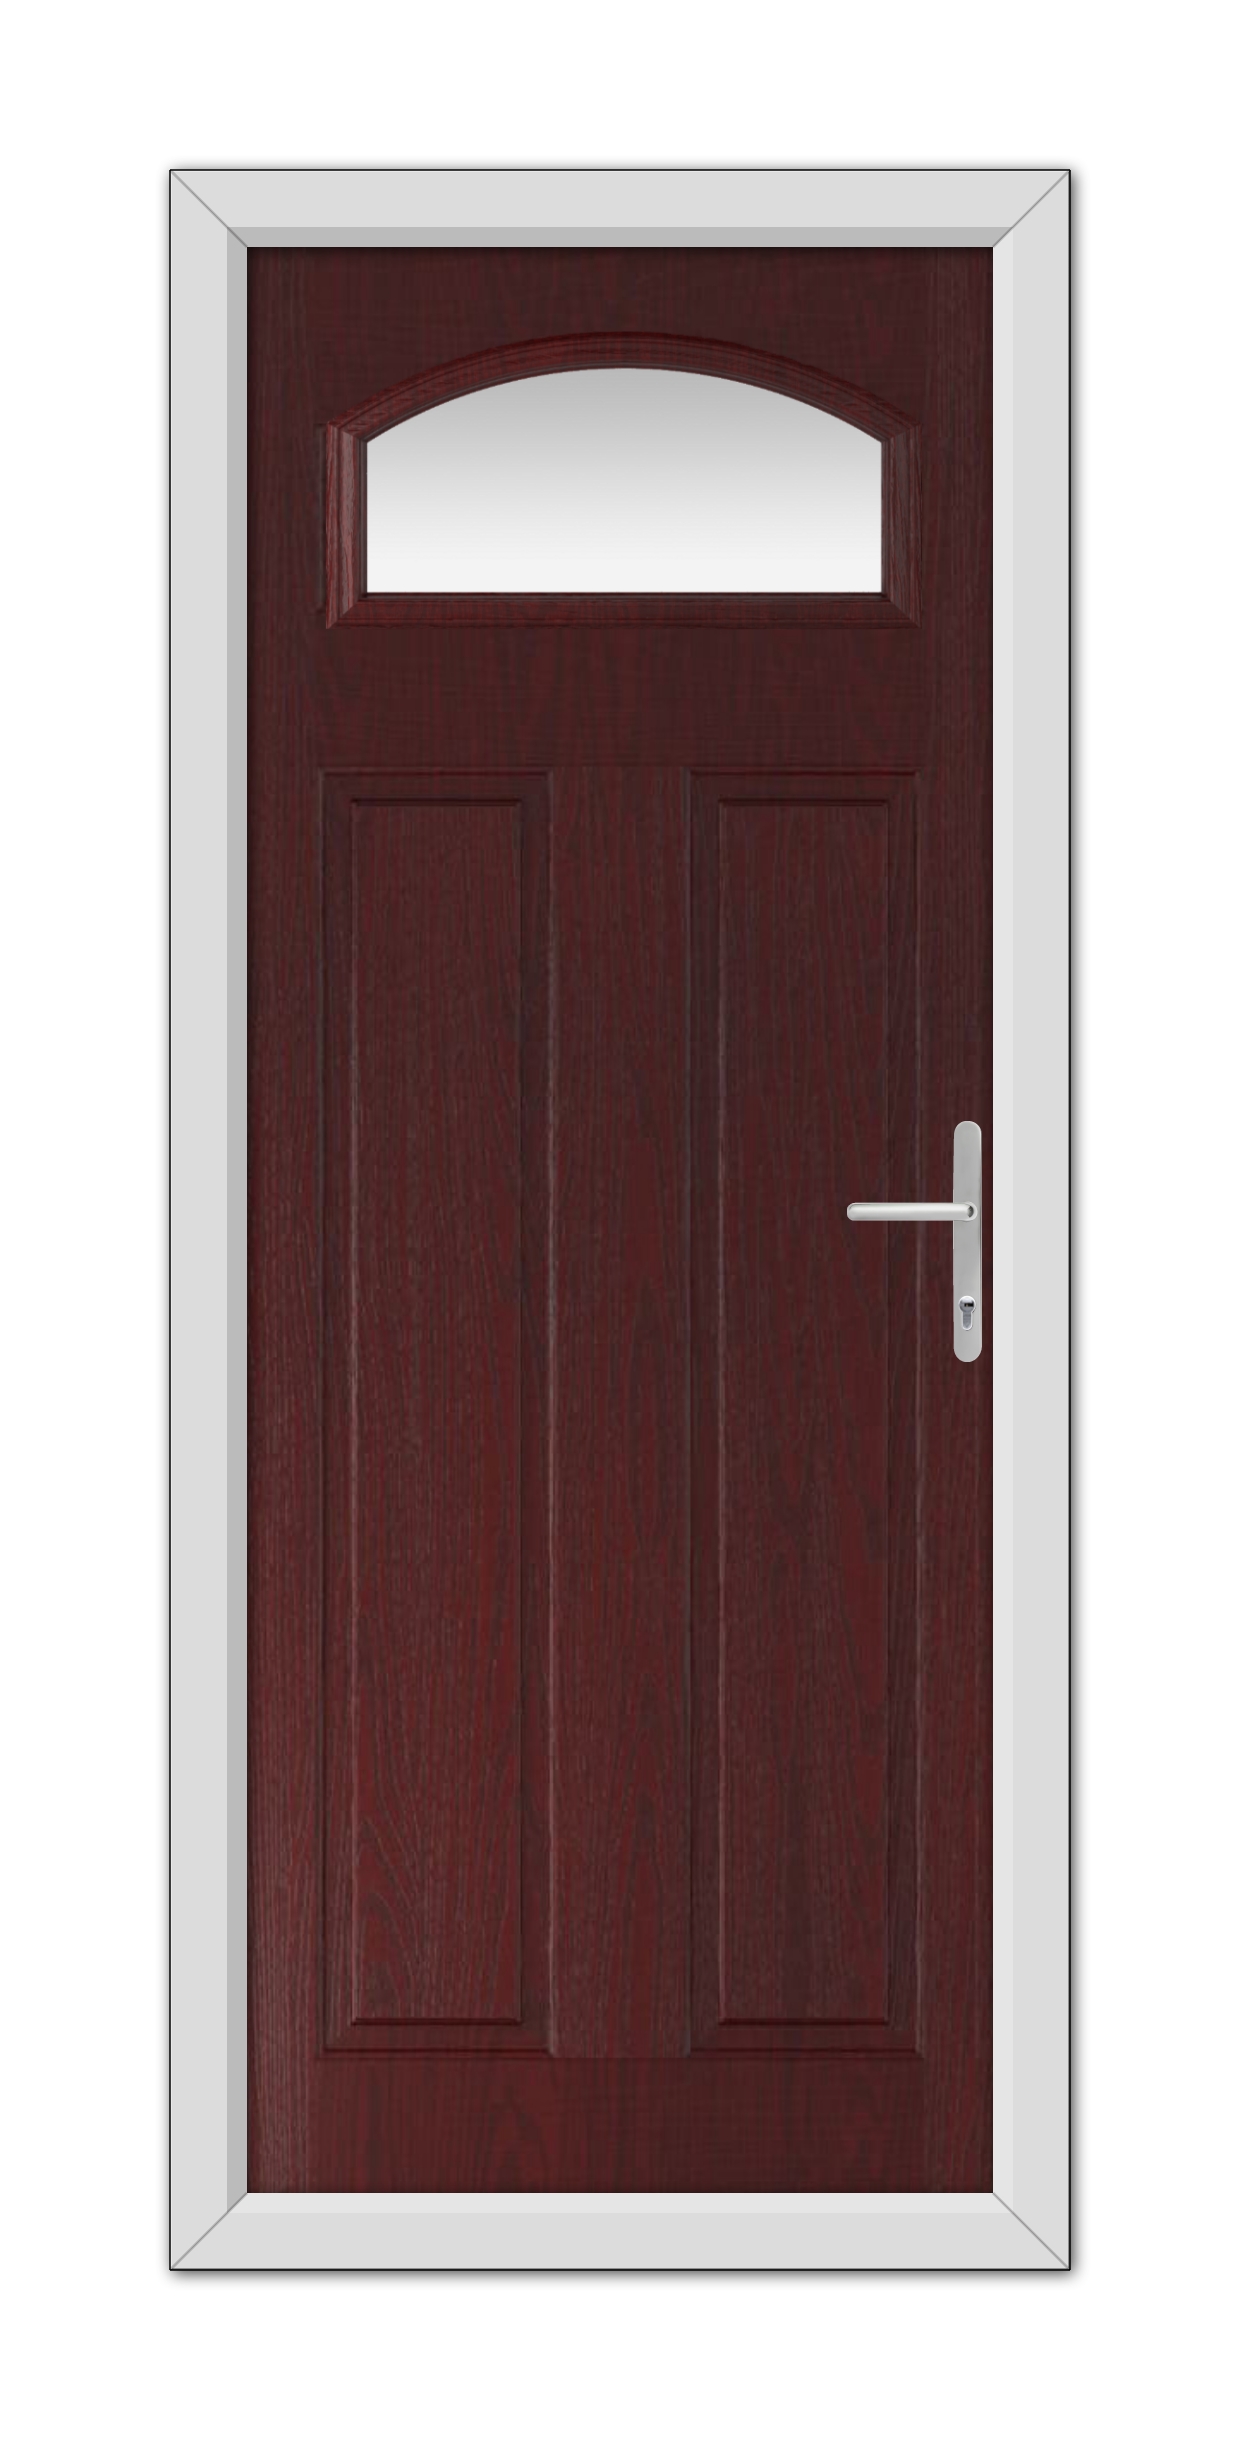 A closed Rosewood Harlington Composite Door 48mm Timber Core with a semi-circular window at the top, featuring a white frame and a metal handle on the right side.